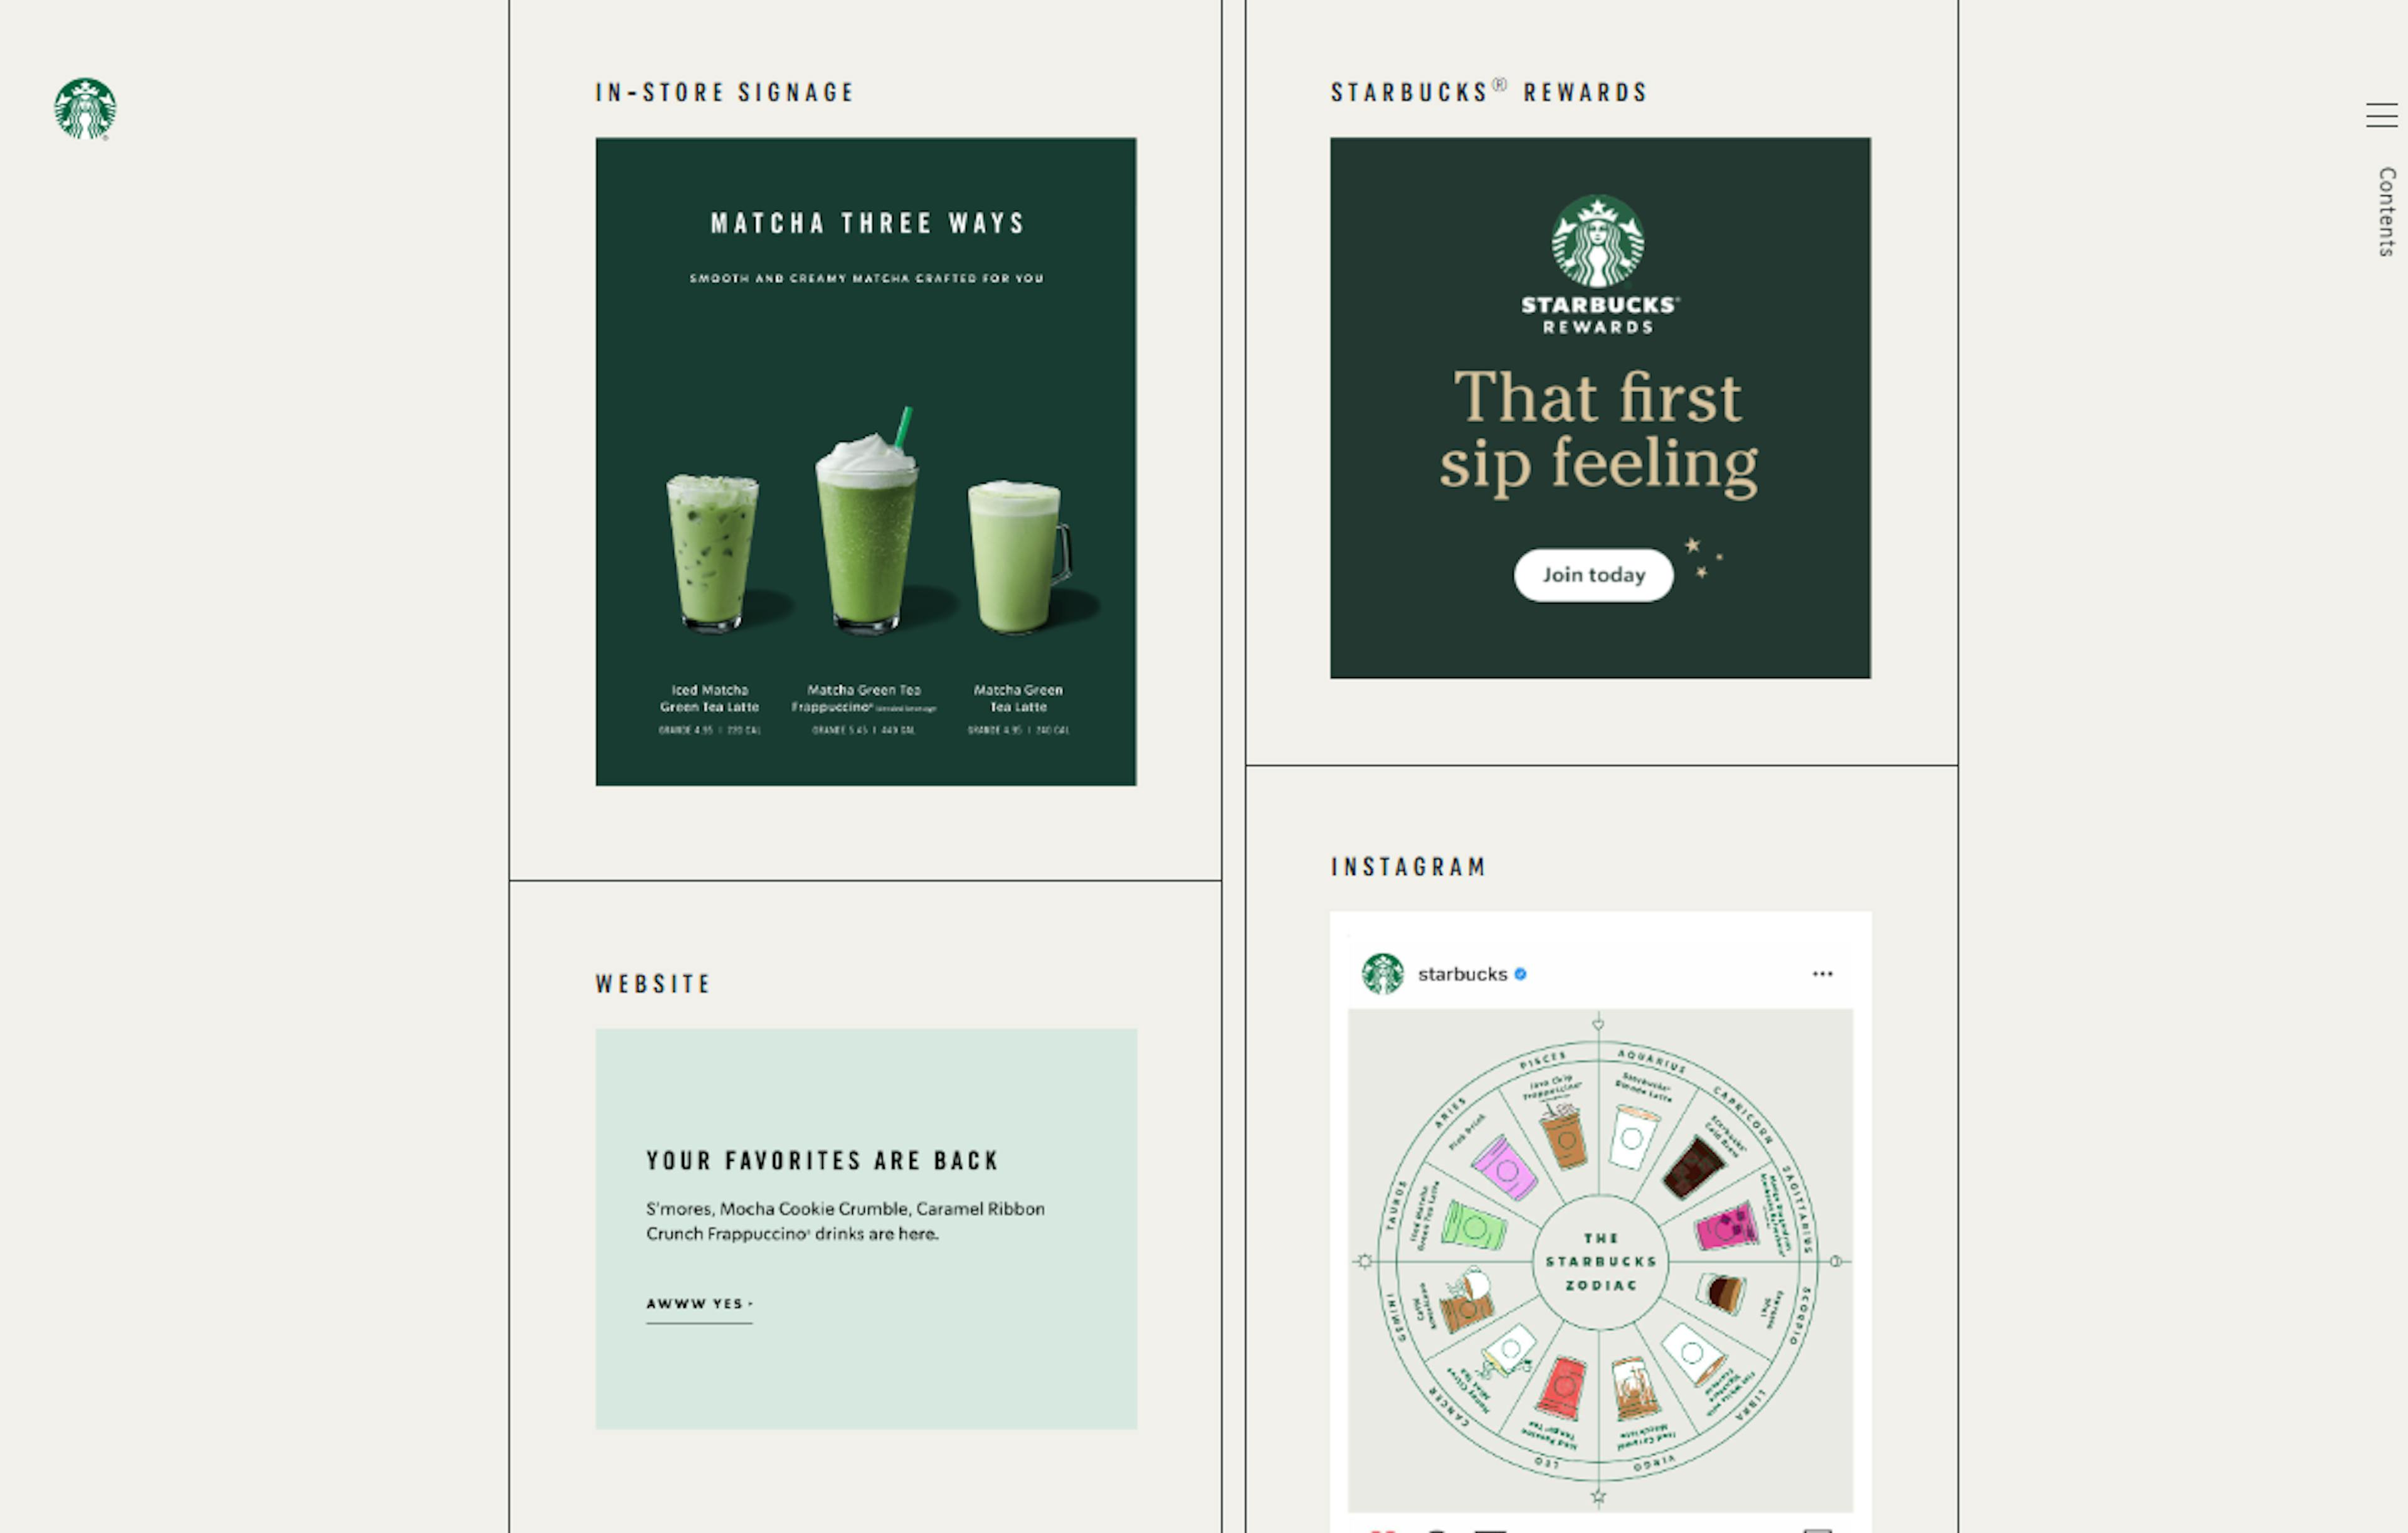 An example of Starbucks’ style guide